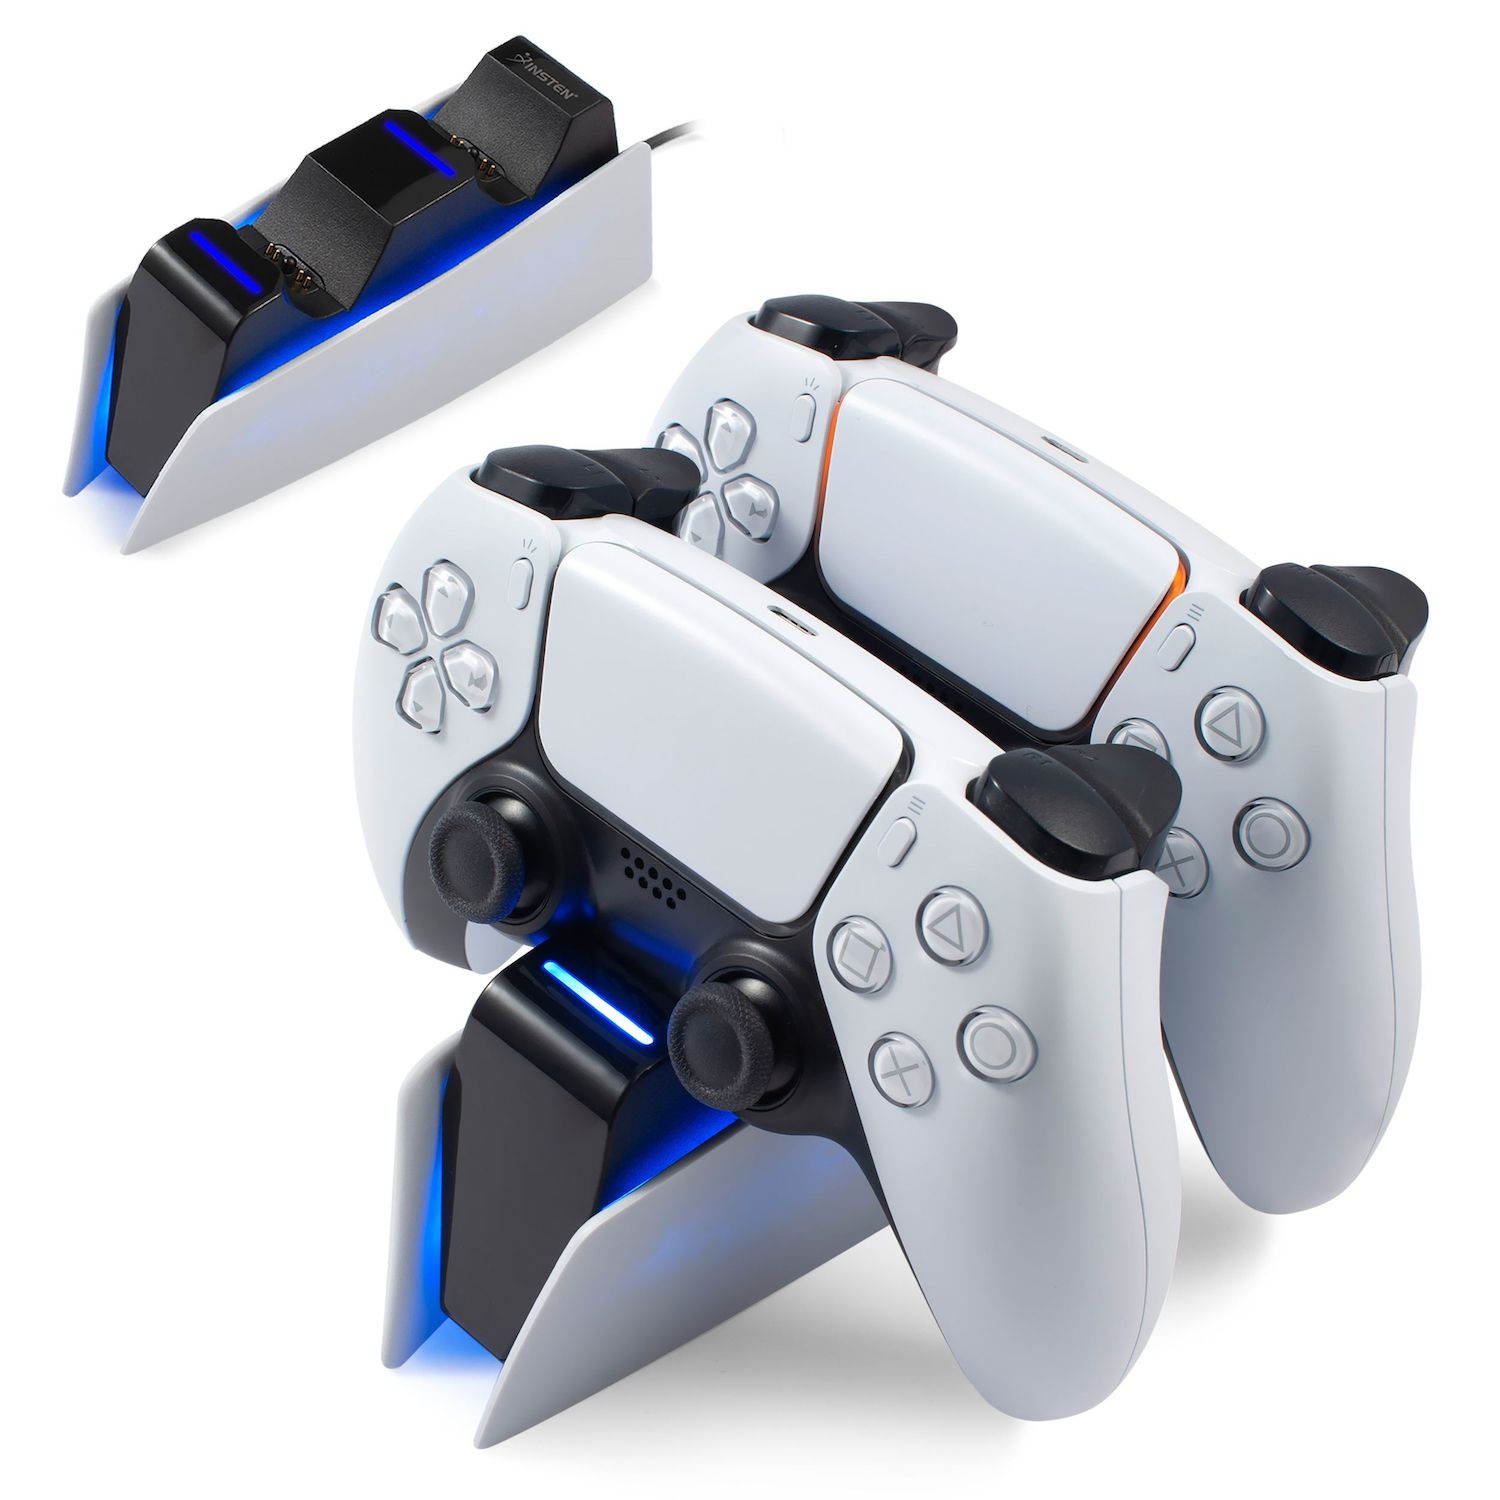 Level Up Your Gaming Experience With Must-Have Video Game Accessories